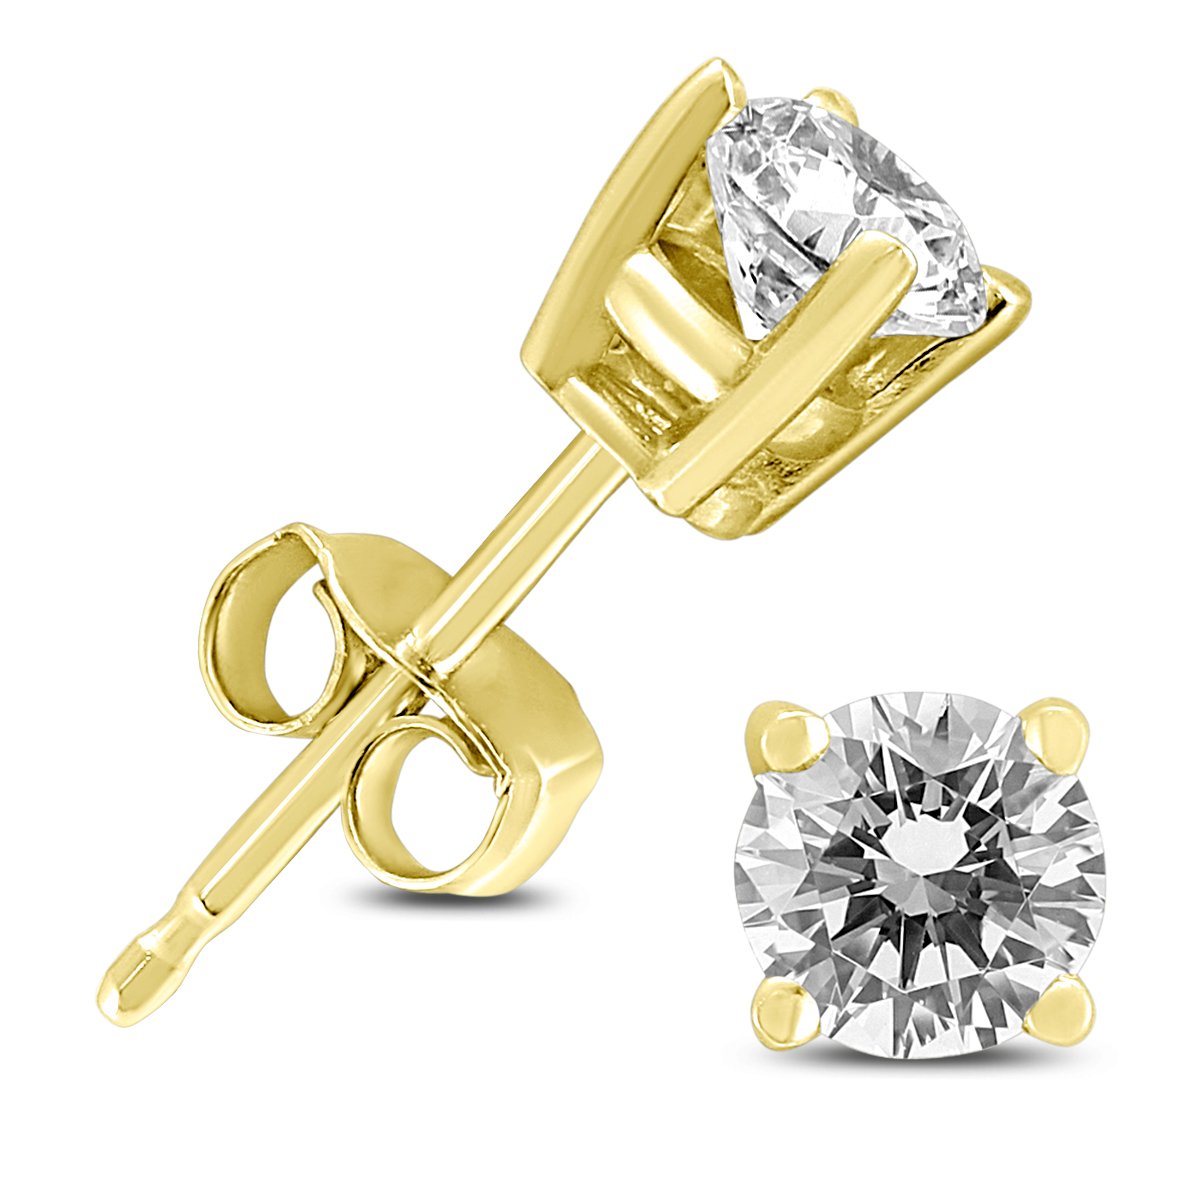 1/2 Carat TW Round Diamond Solitaire Stud Earrings in 14K Yellow or White Gold